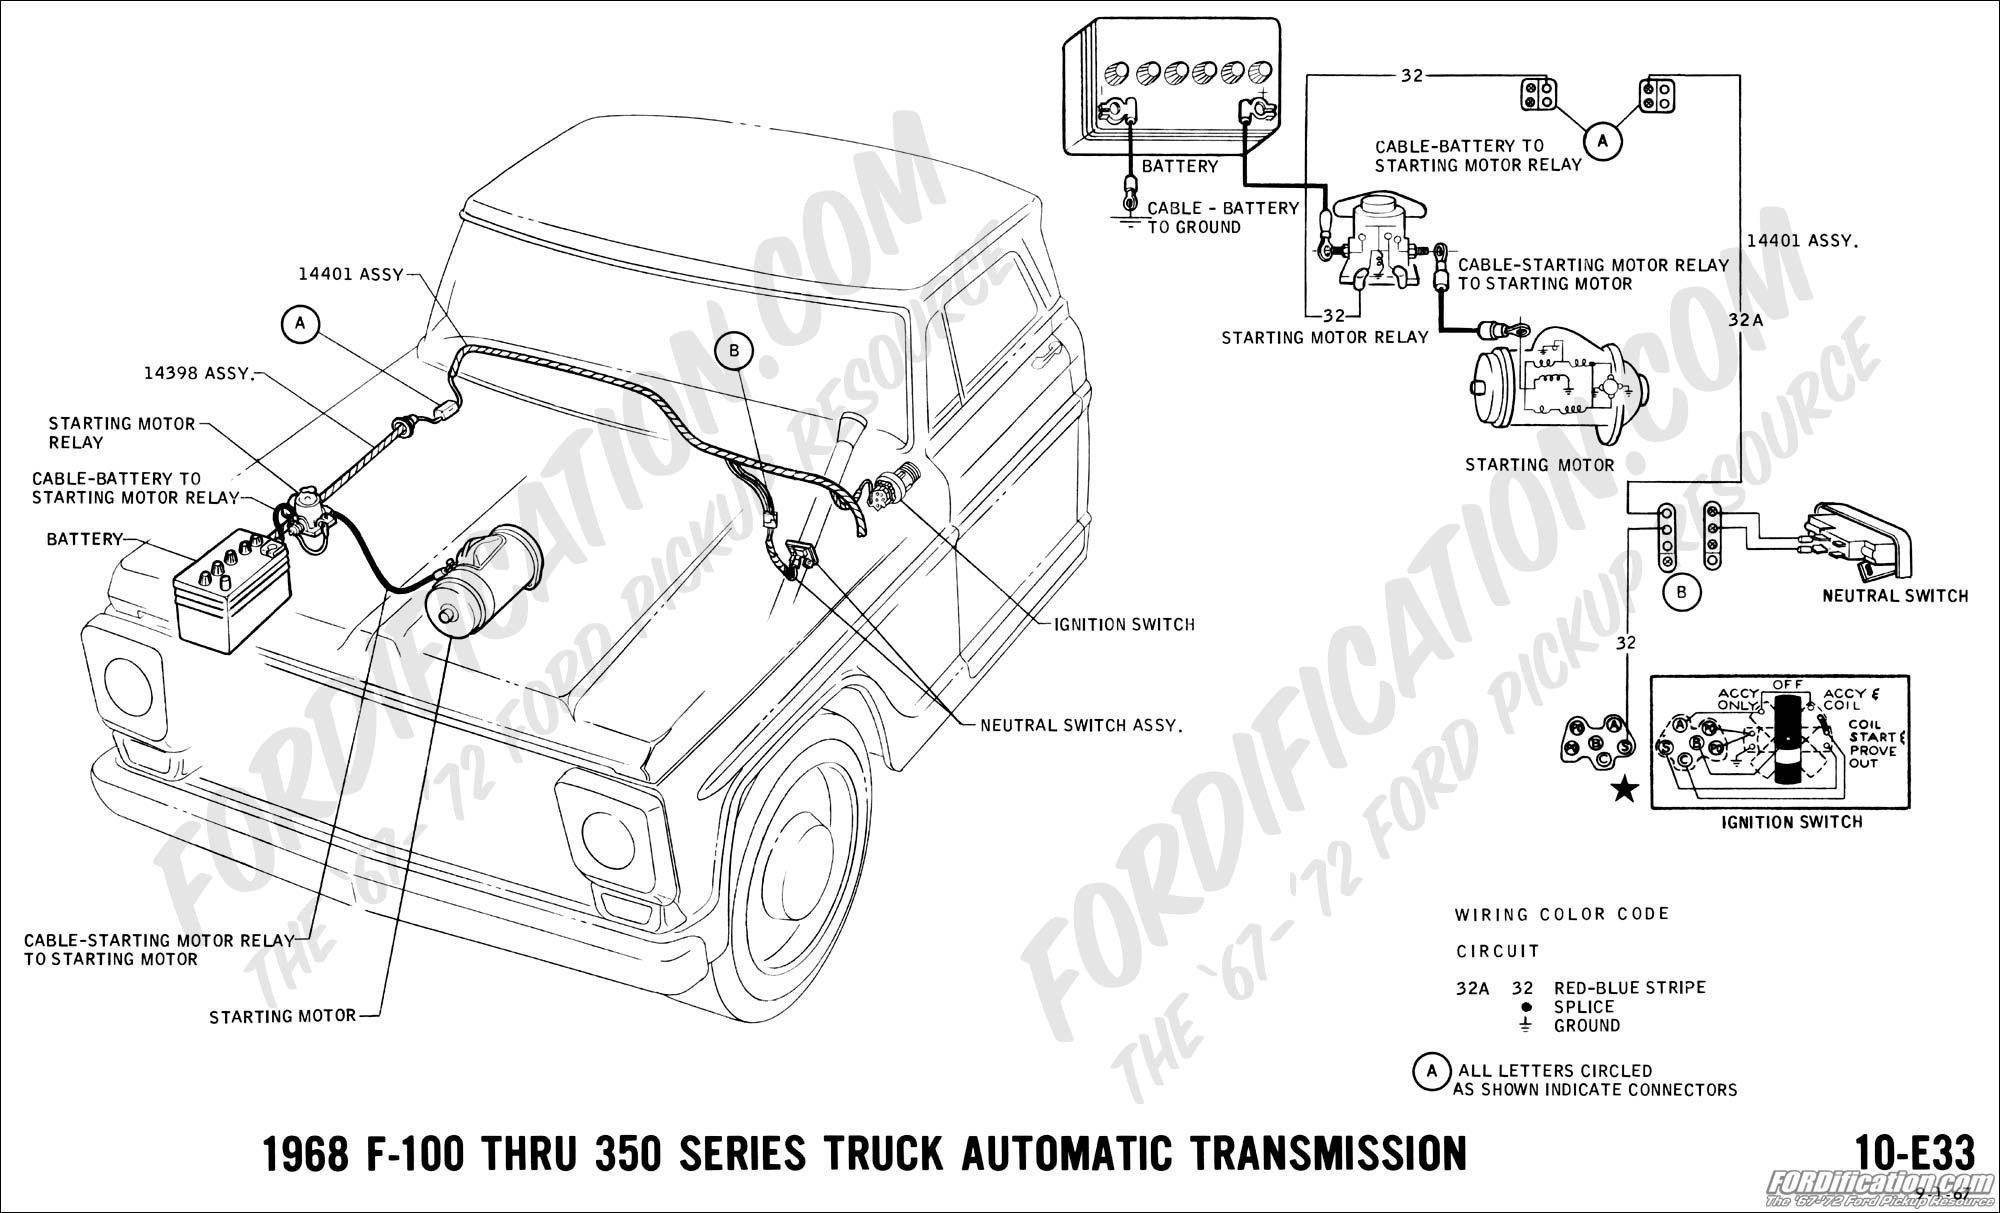 1968 Mustang Neutral Safety Switch Wiring Diagram | Wiring Diagram - 4L60E Neutral Safety Switch Wiring Diagram